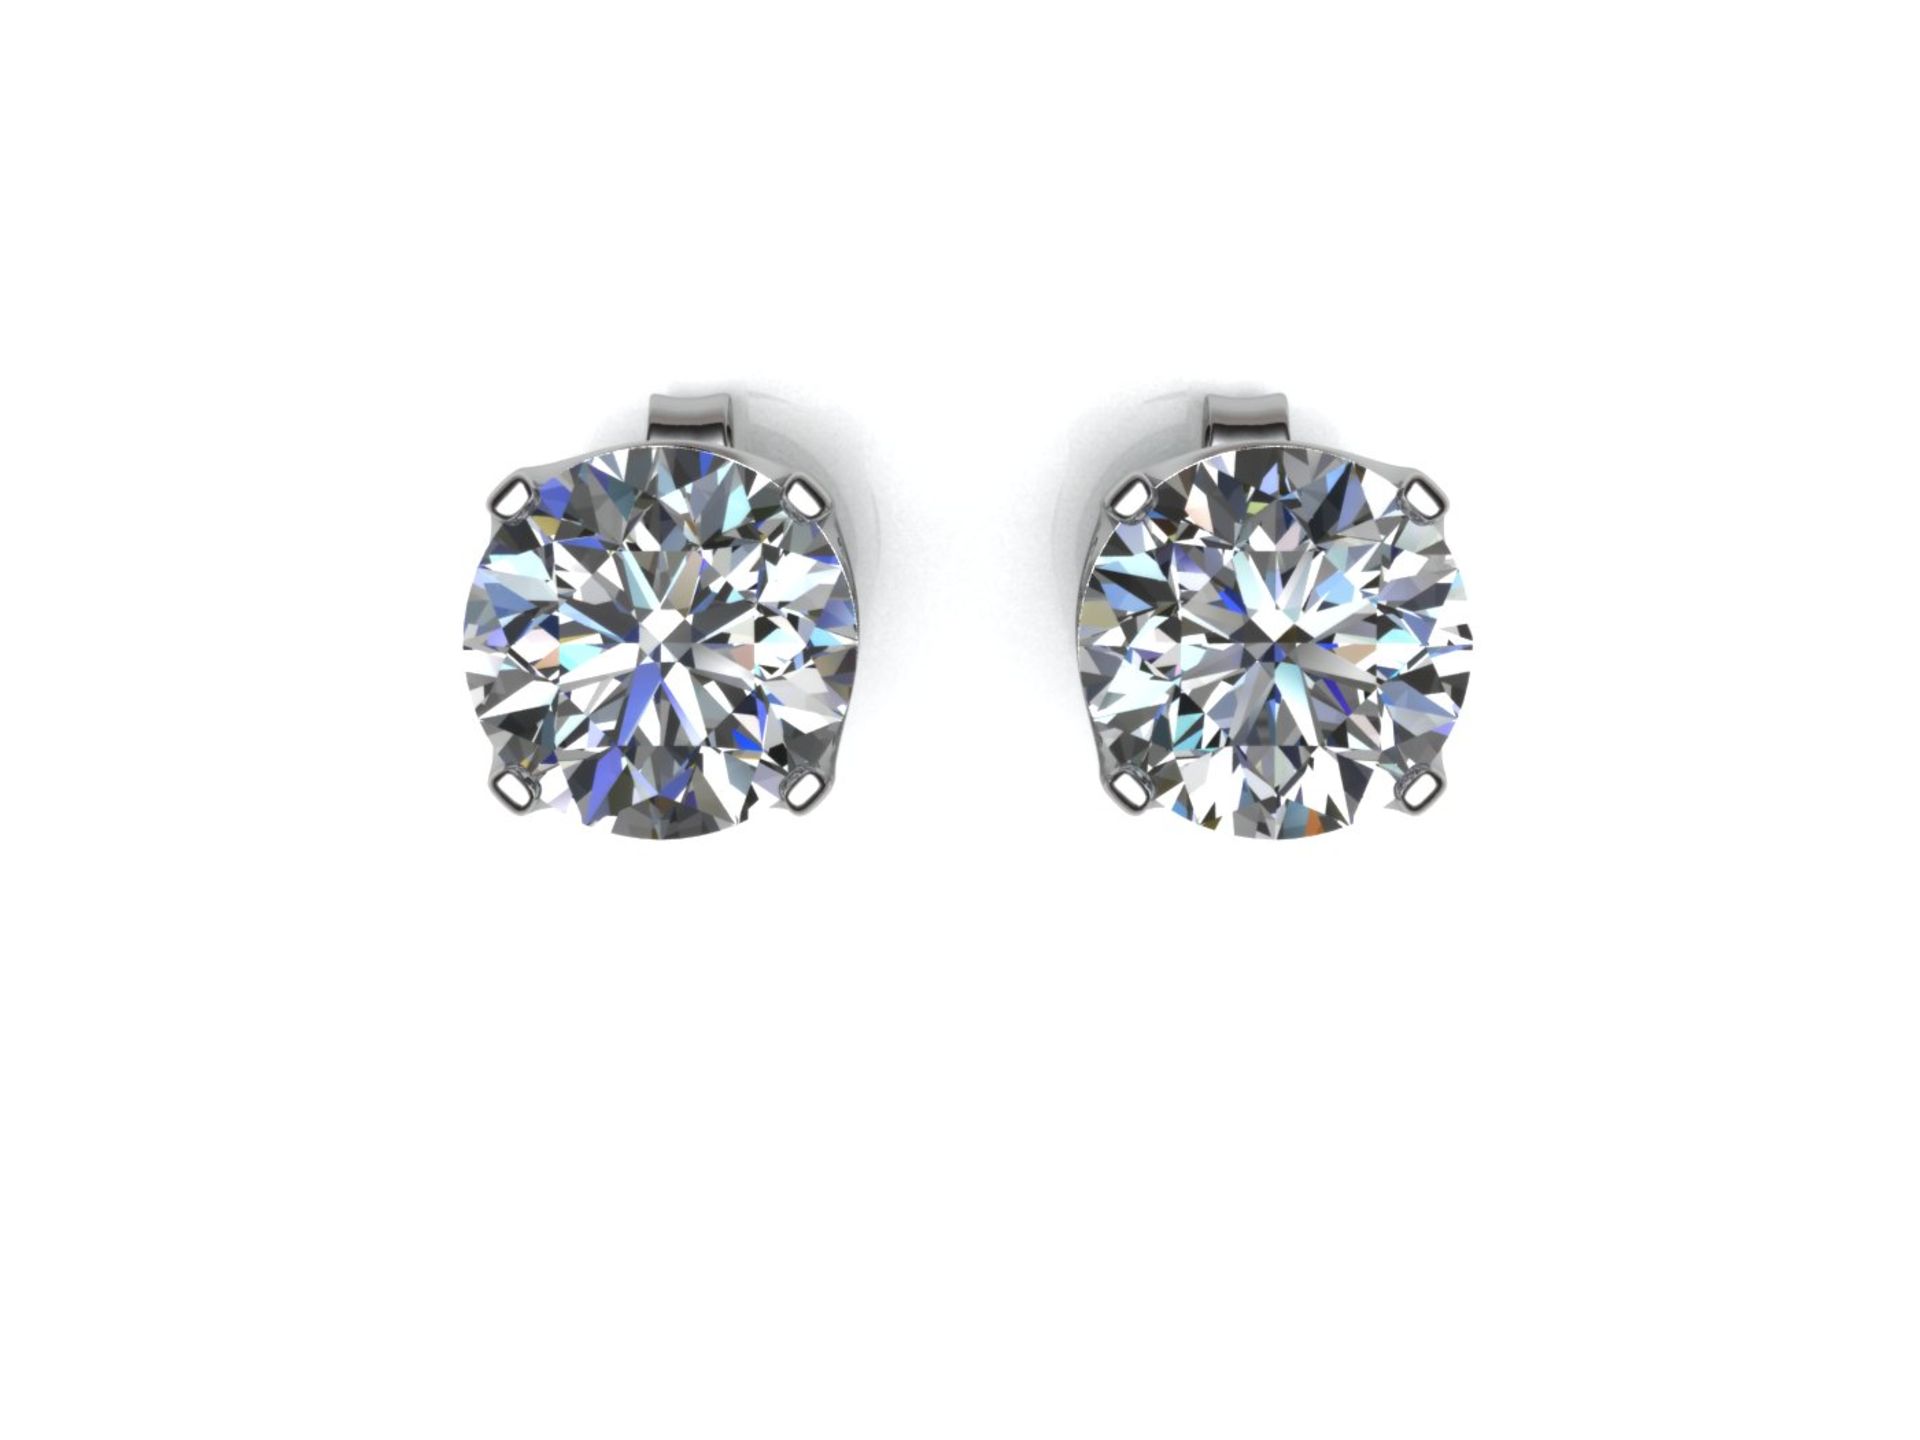 9ct White Gold Four Claw Set Diamond Earring 0.25 Carats - Valued by GIE £3,020.00 - 9ct White